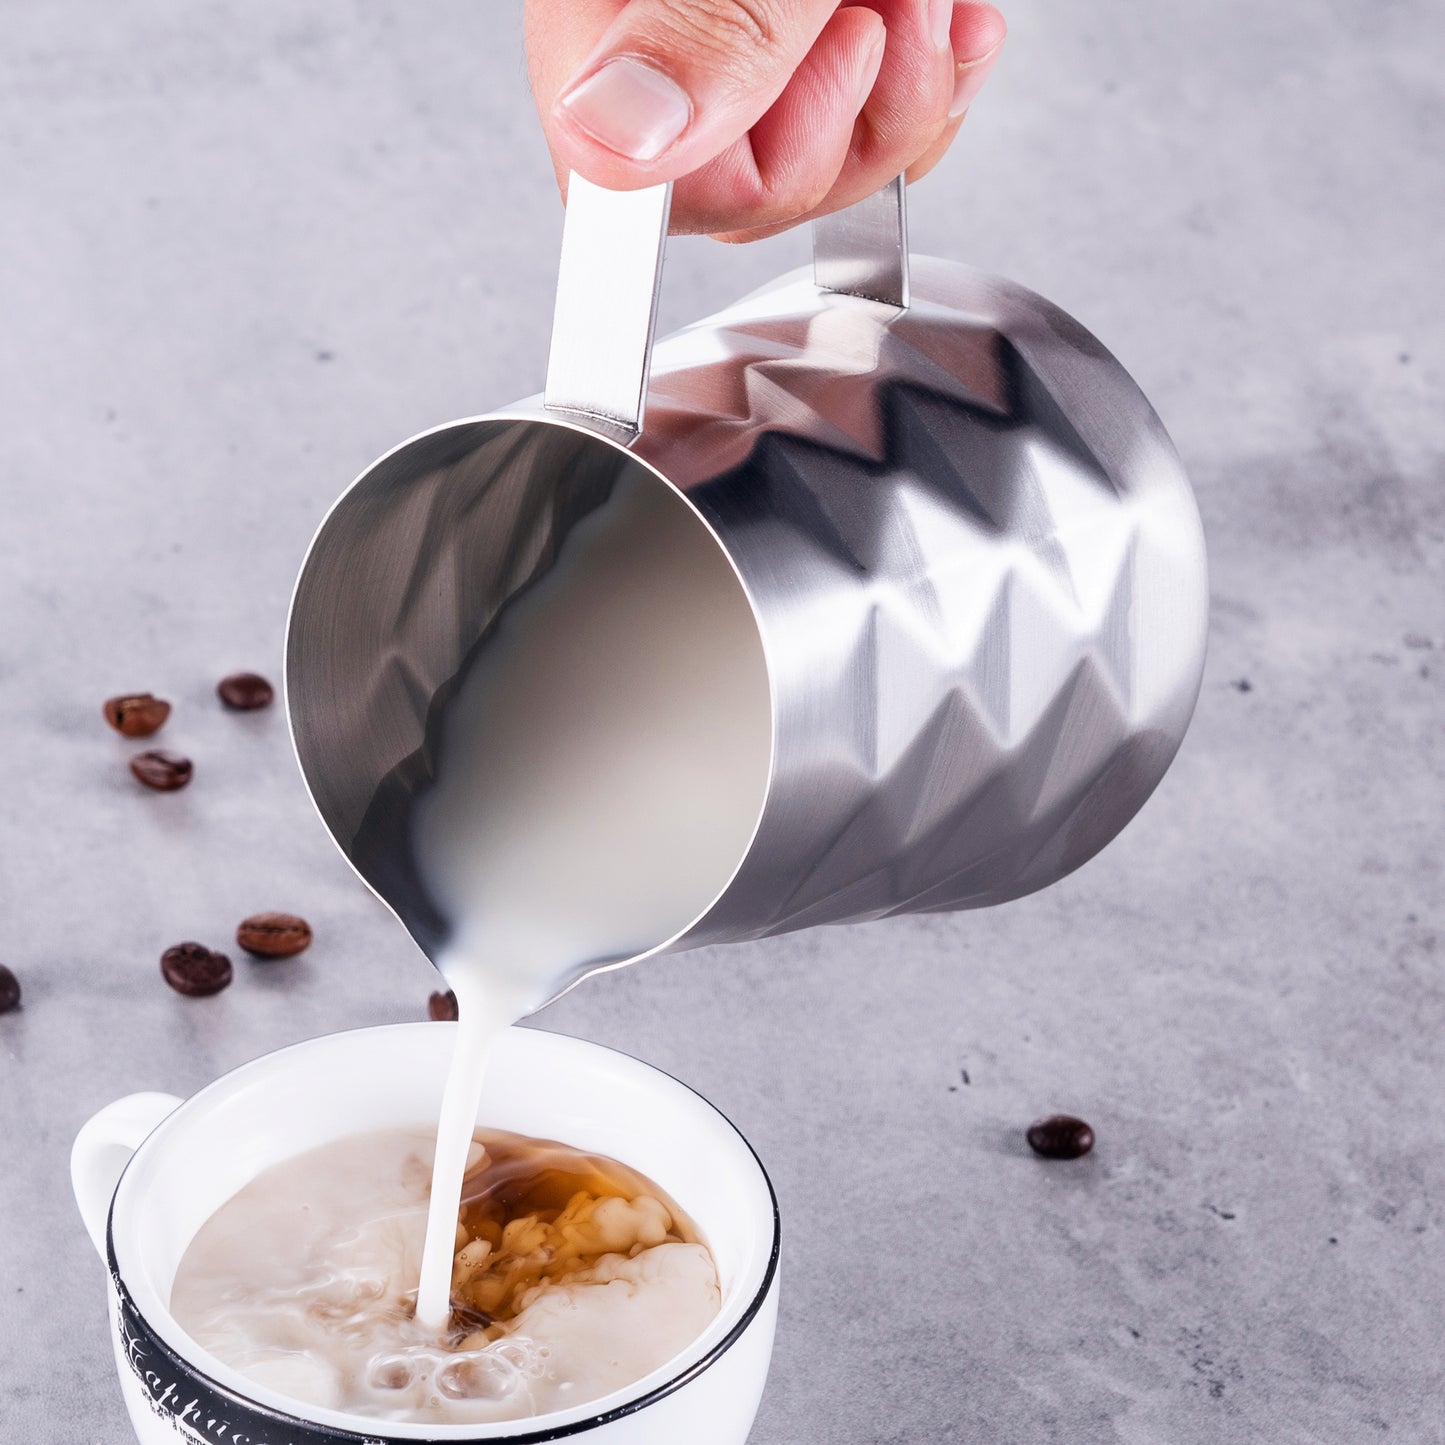 Pouring Cream Out Of Mini Milk Pitcher In Stylish Prism Design For Coffee Creamer